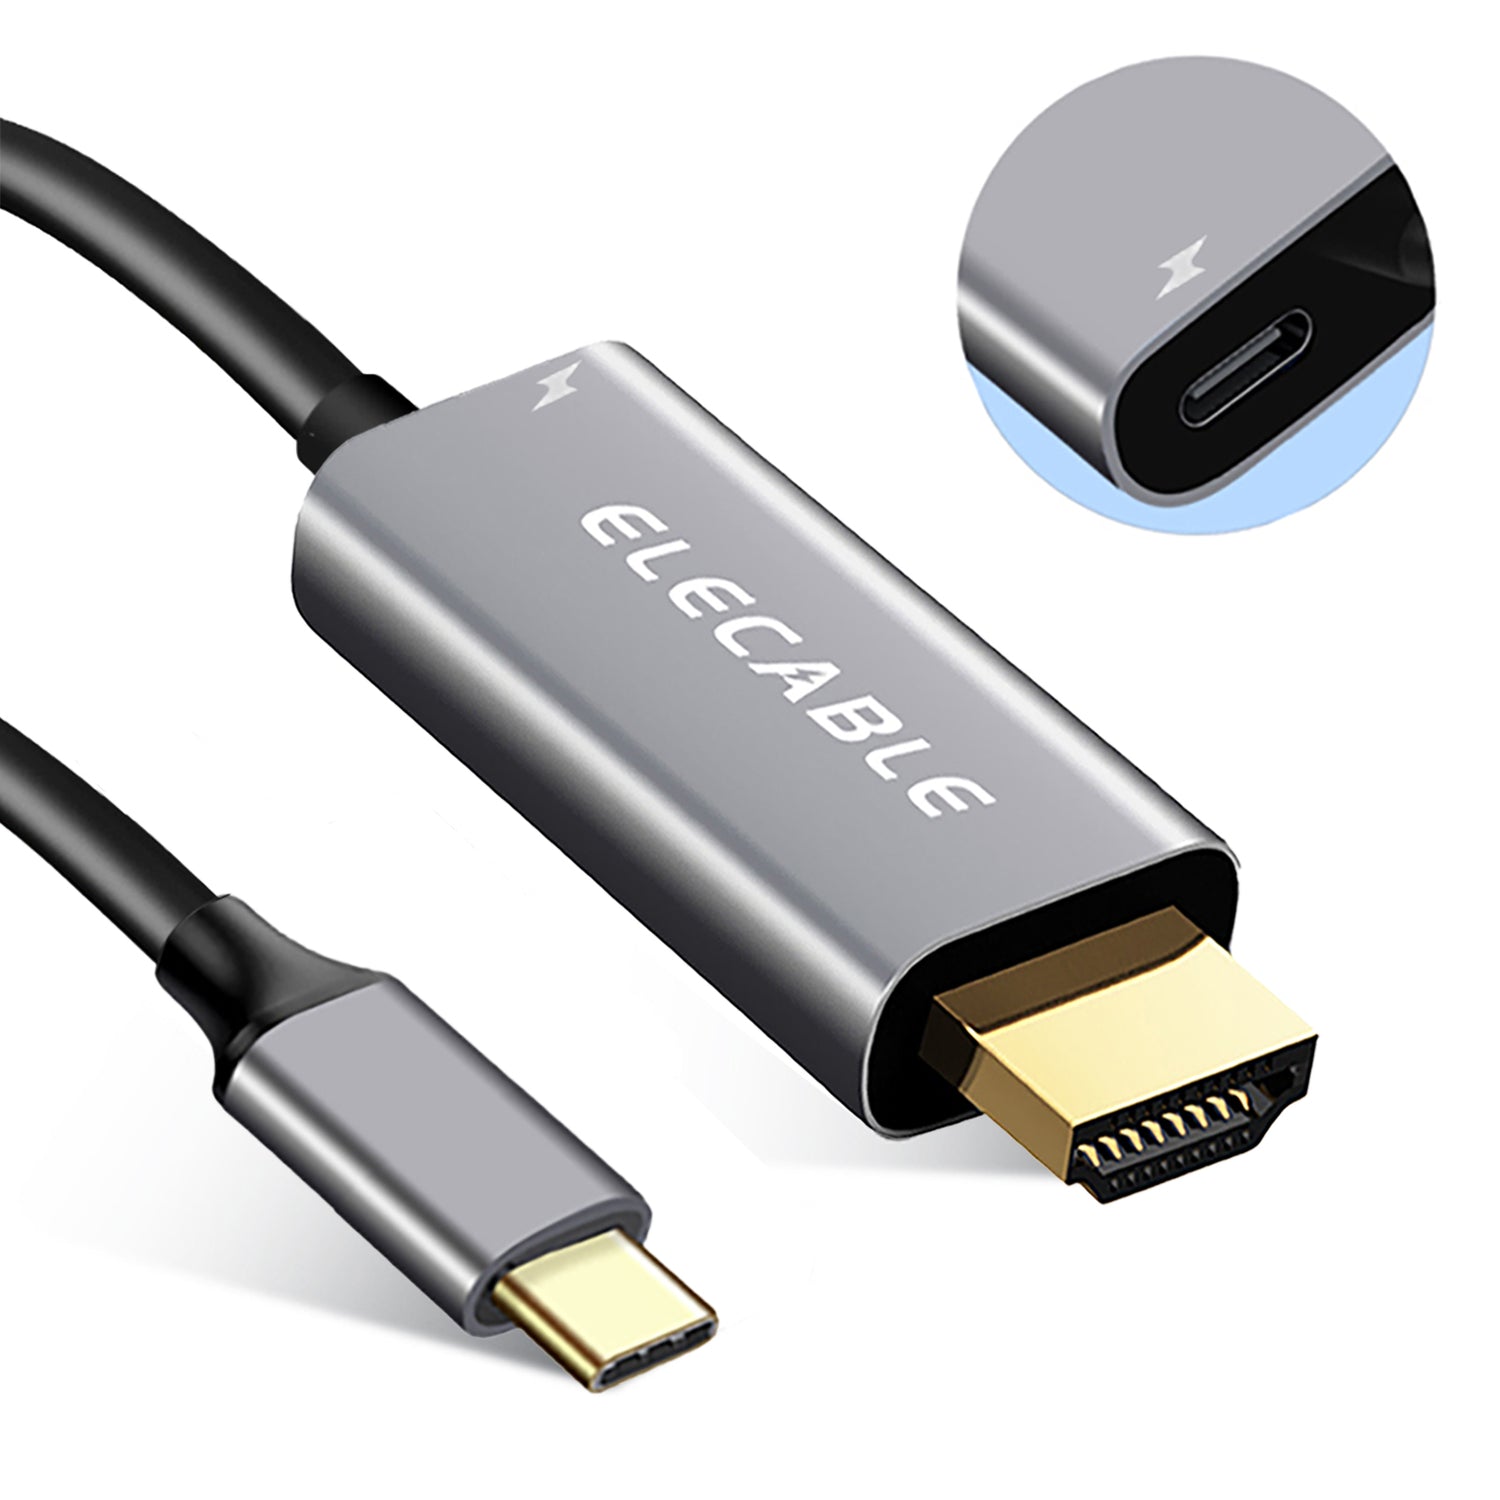 USB to HDMI Adapter Cable – ELECABLE